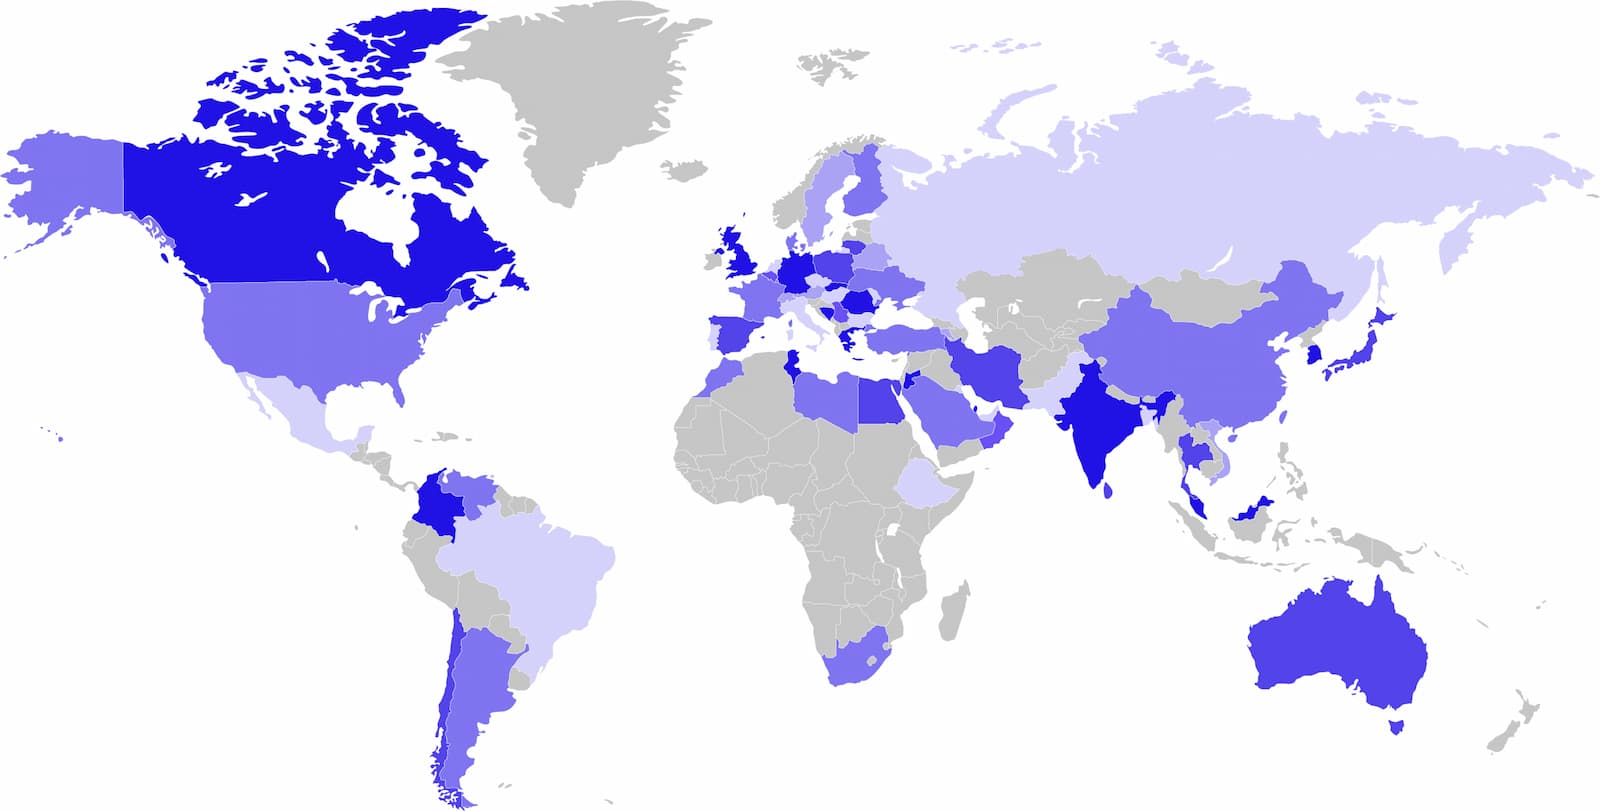 World map showing where Herkula is active